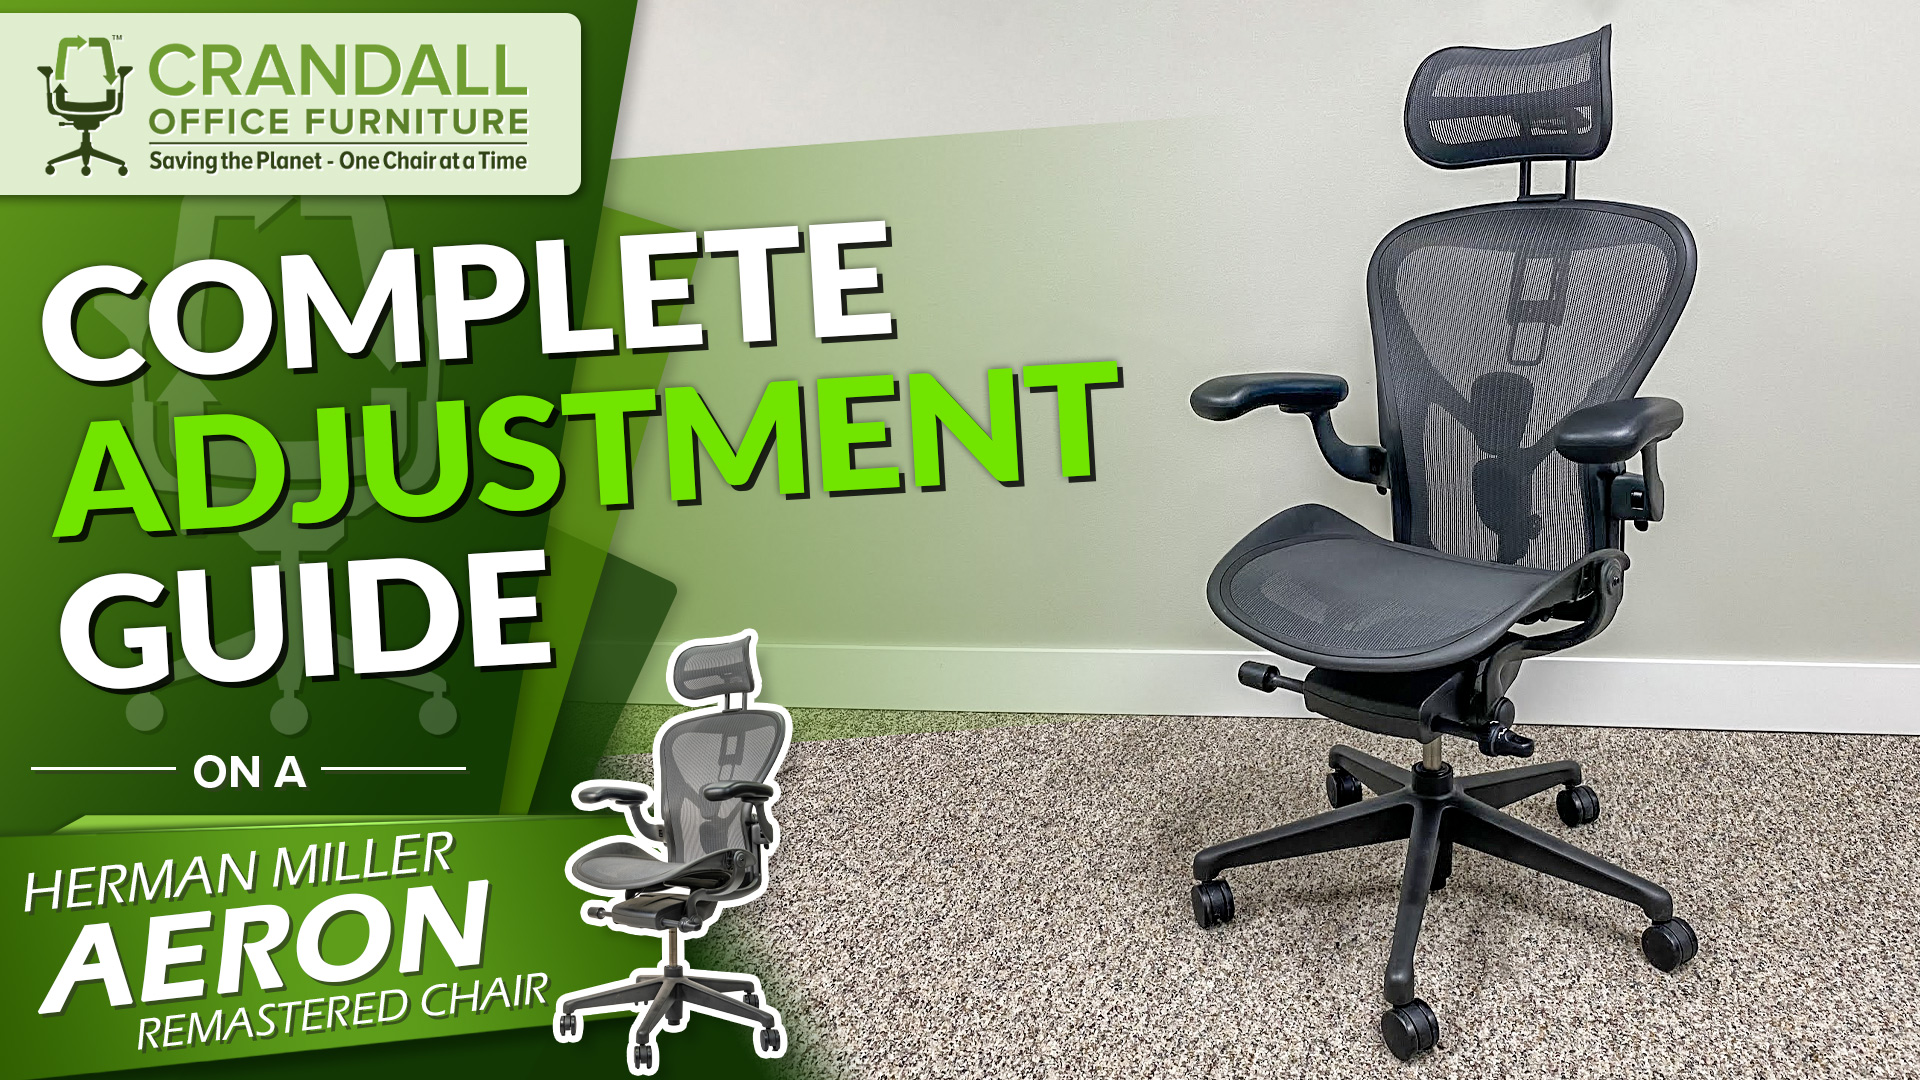 Complete Adjustment Guide For The Herman Miller Aeron Remastered Chair